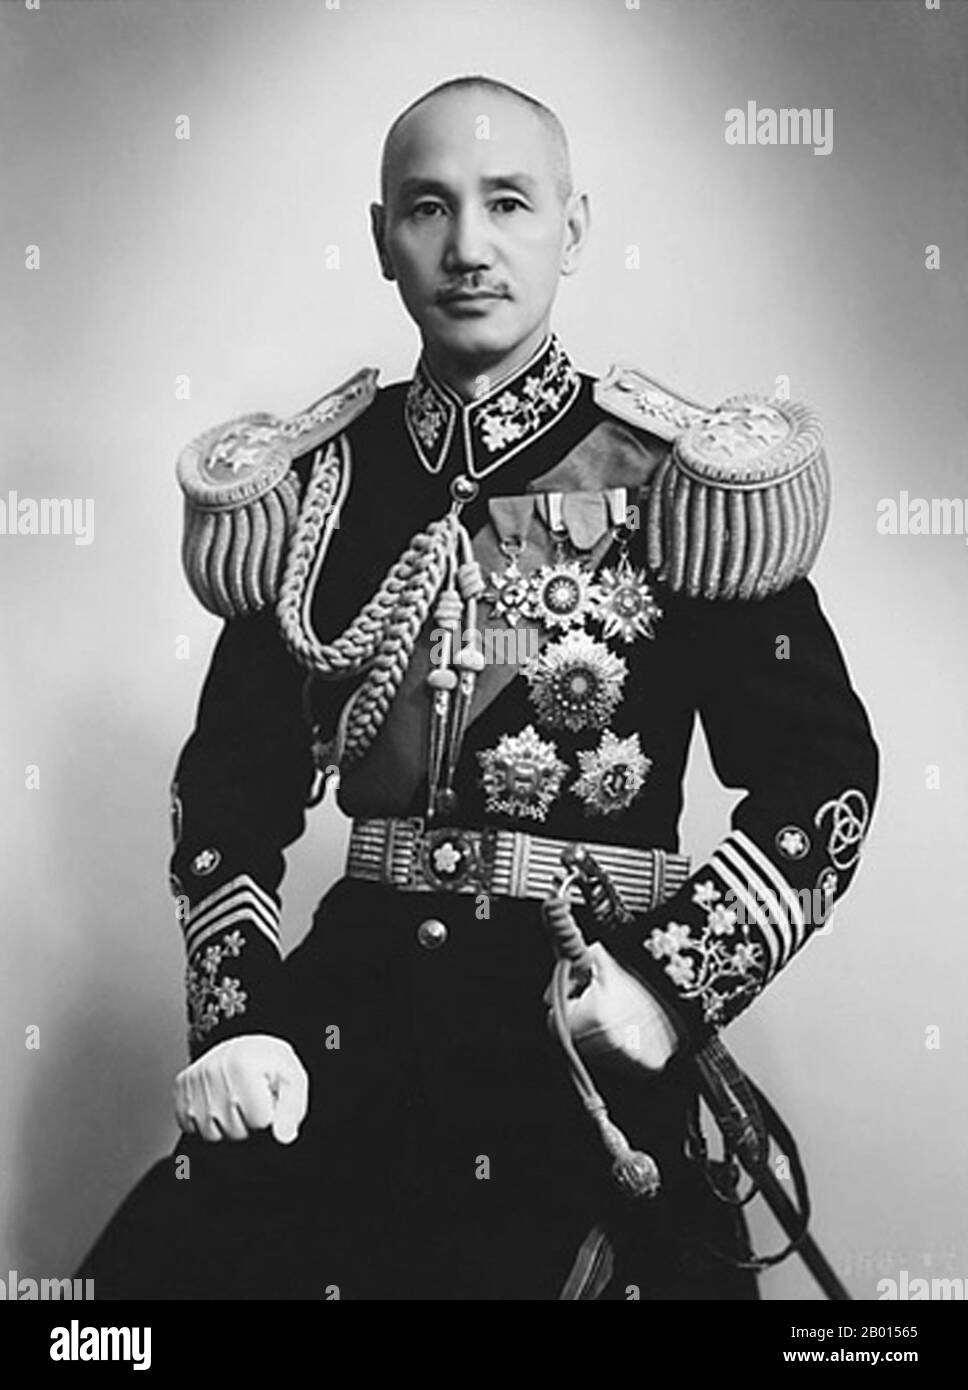 China: General Chiang Kai-shek (October 31, 1887 – April 5, 1975), leader of the Kuomintang, 1943.  Chiang Kai-shek was a political and military leader of 20th century China. He is known as Jiǎng Jièshí or Jiǎng Zhōngzhèng in Mandarin. Chiang was an influential member of the Nationalist Party, the Kuomintang (KMT), and was a close ally of Sun Yat-sen. He became the Commandant of the Kuomintang's Whampoa Military Academy, and took Sun's place as leader of the KMT when Sun died in 1925. In 1926, Chiang led the Northern Expedition to unify the country, becoming China's nominal leader. Stock Photo